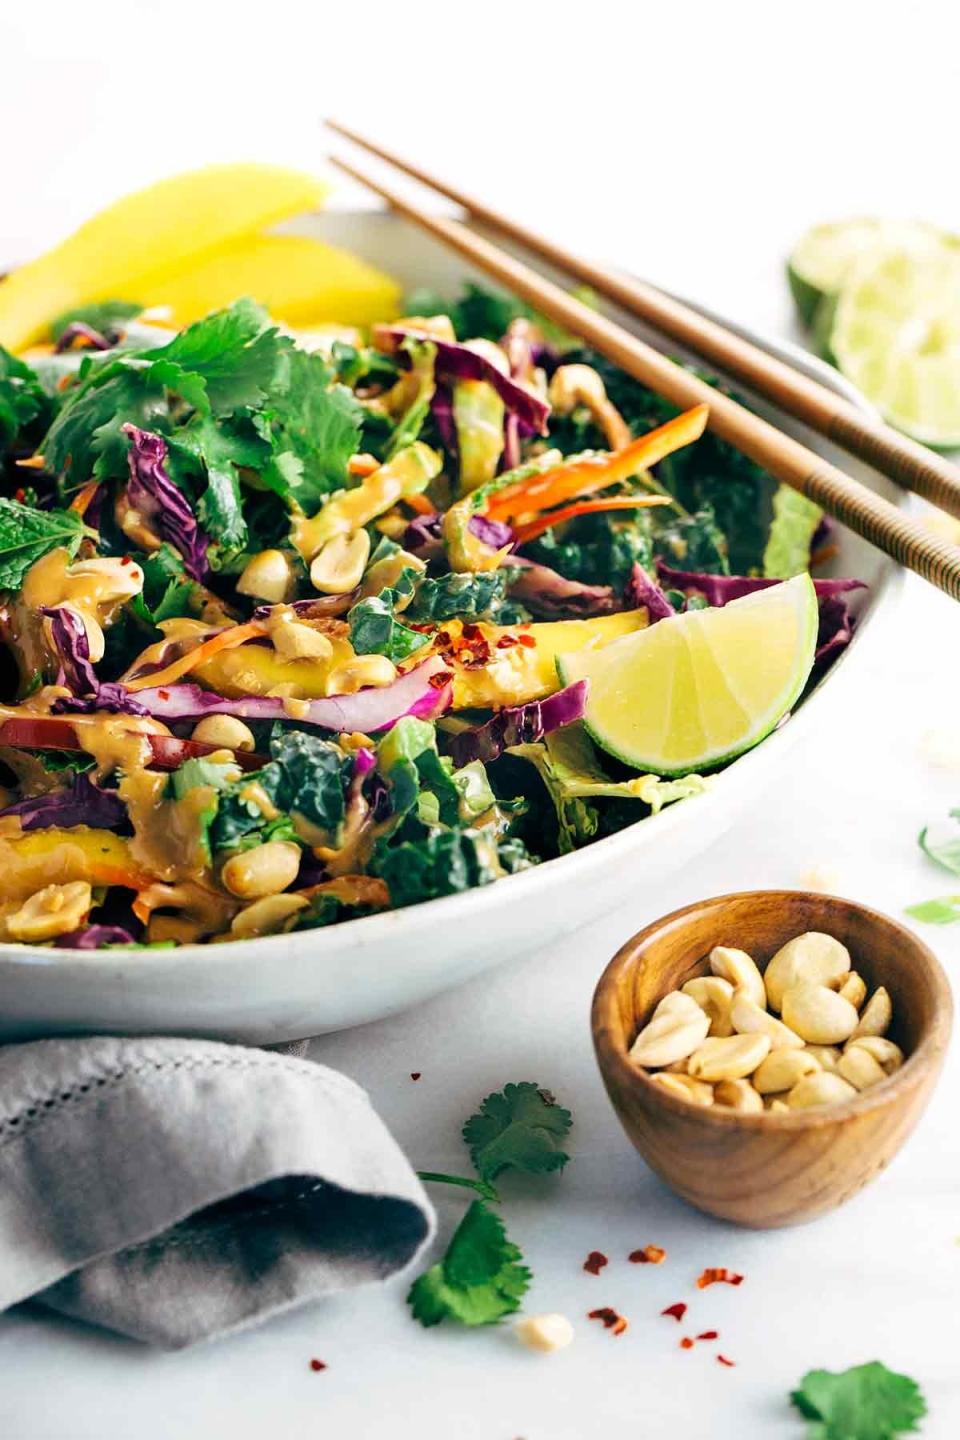 *drizzles peanut dressing over everything* Recipe: Crunchy Thai Salad with Peanut Dressing 